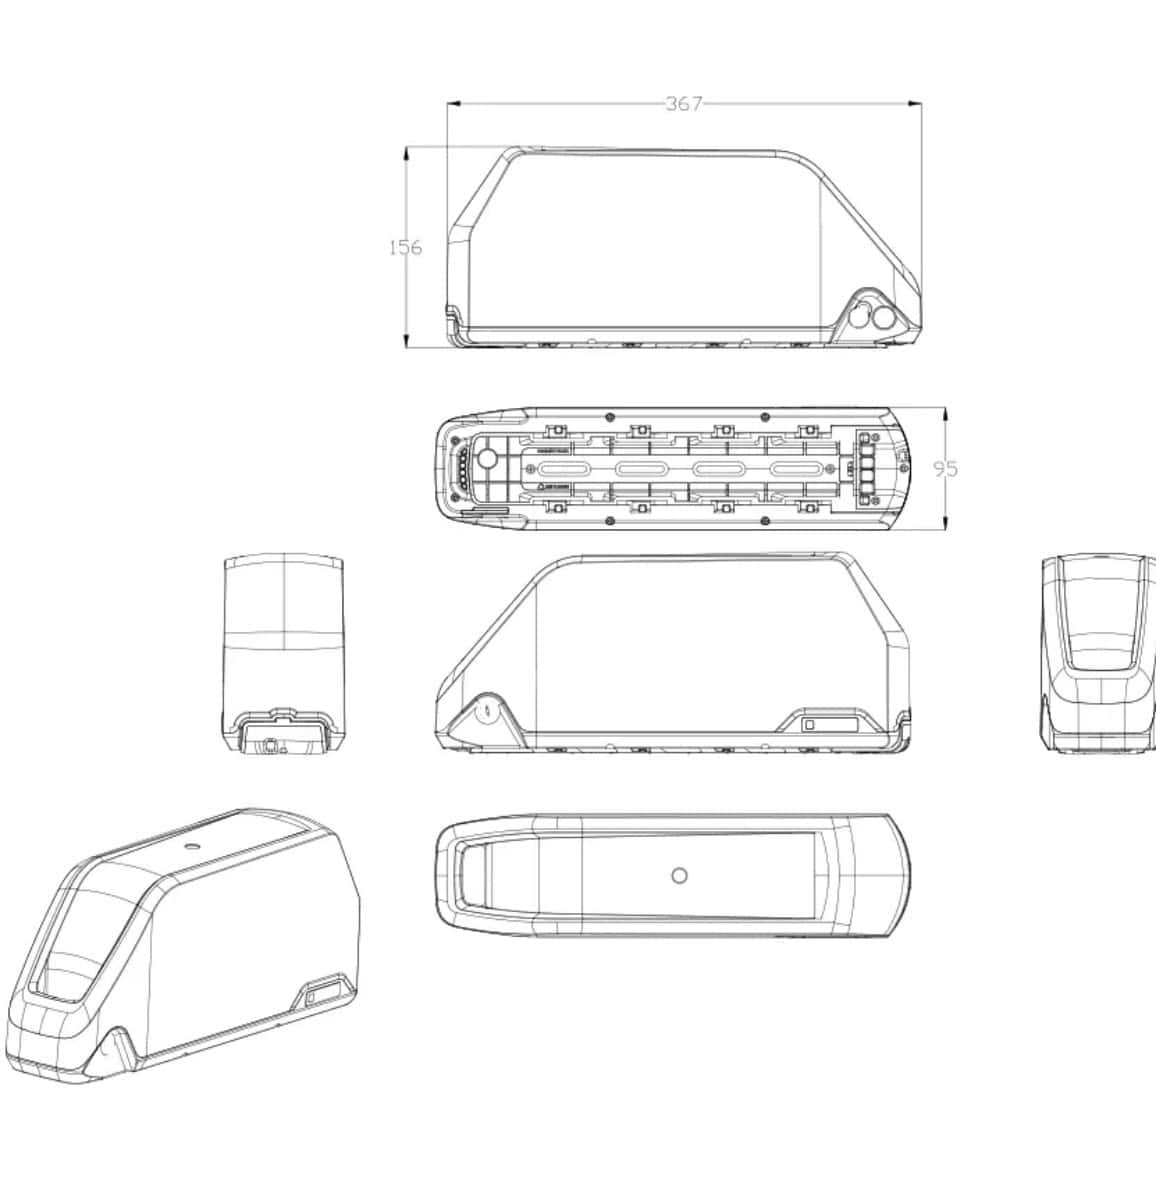 A drawing of the side and back of an electric vehicle.